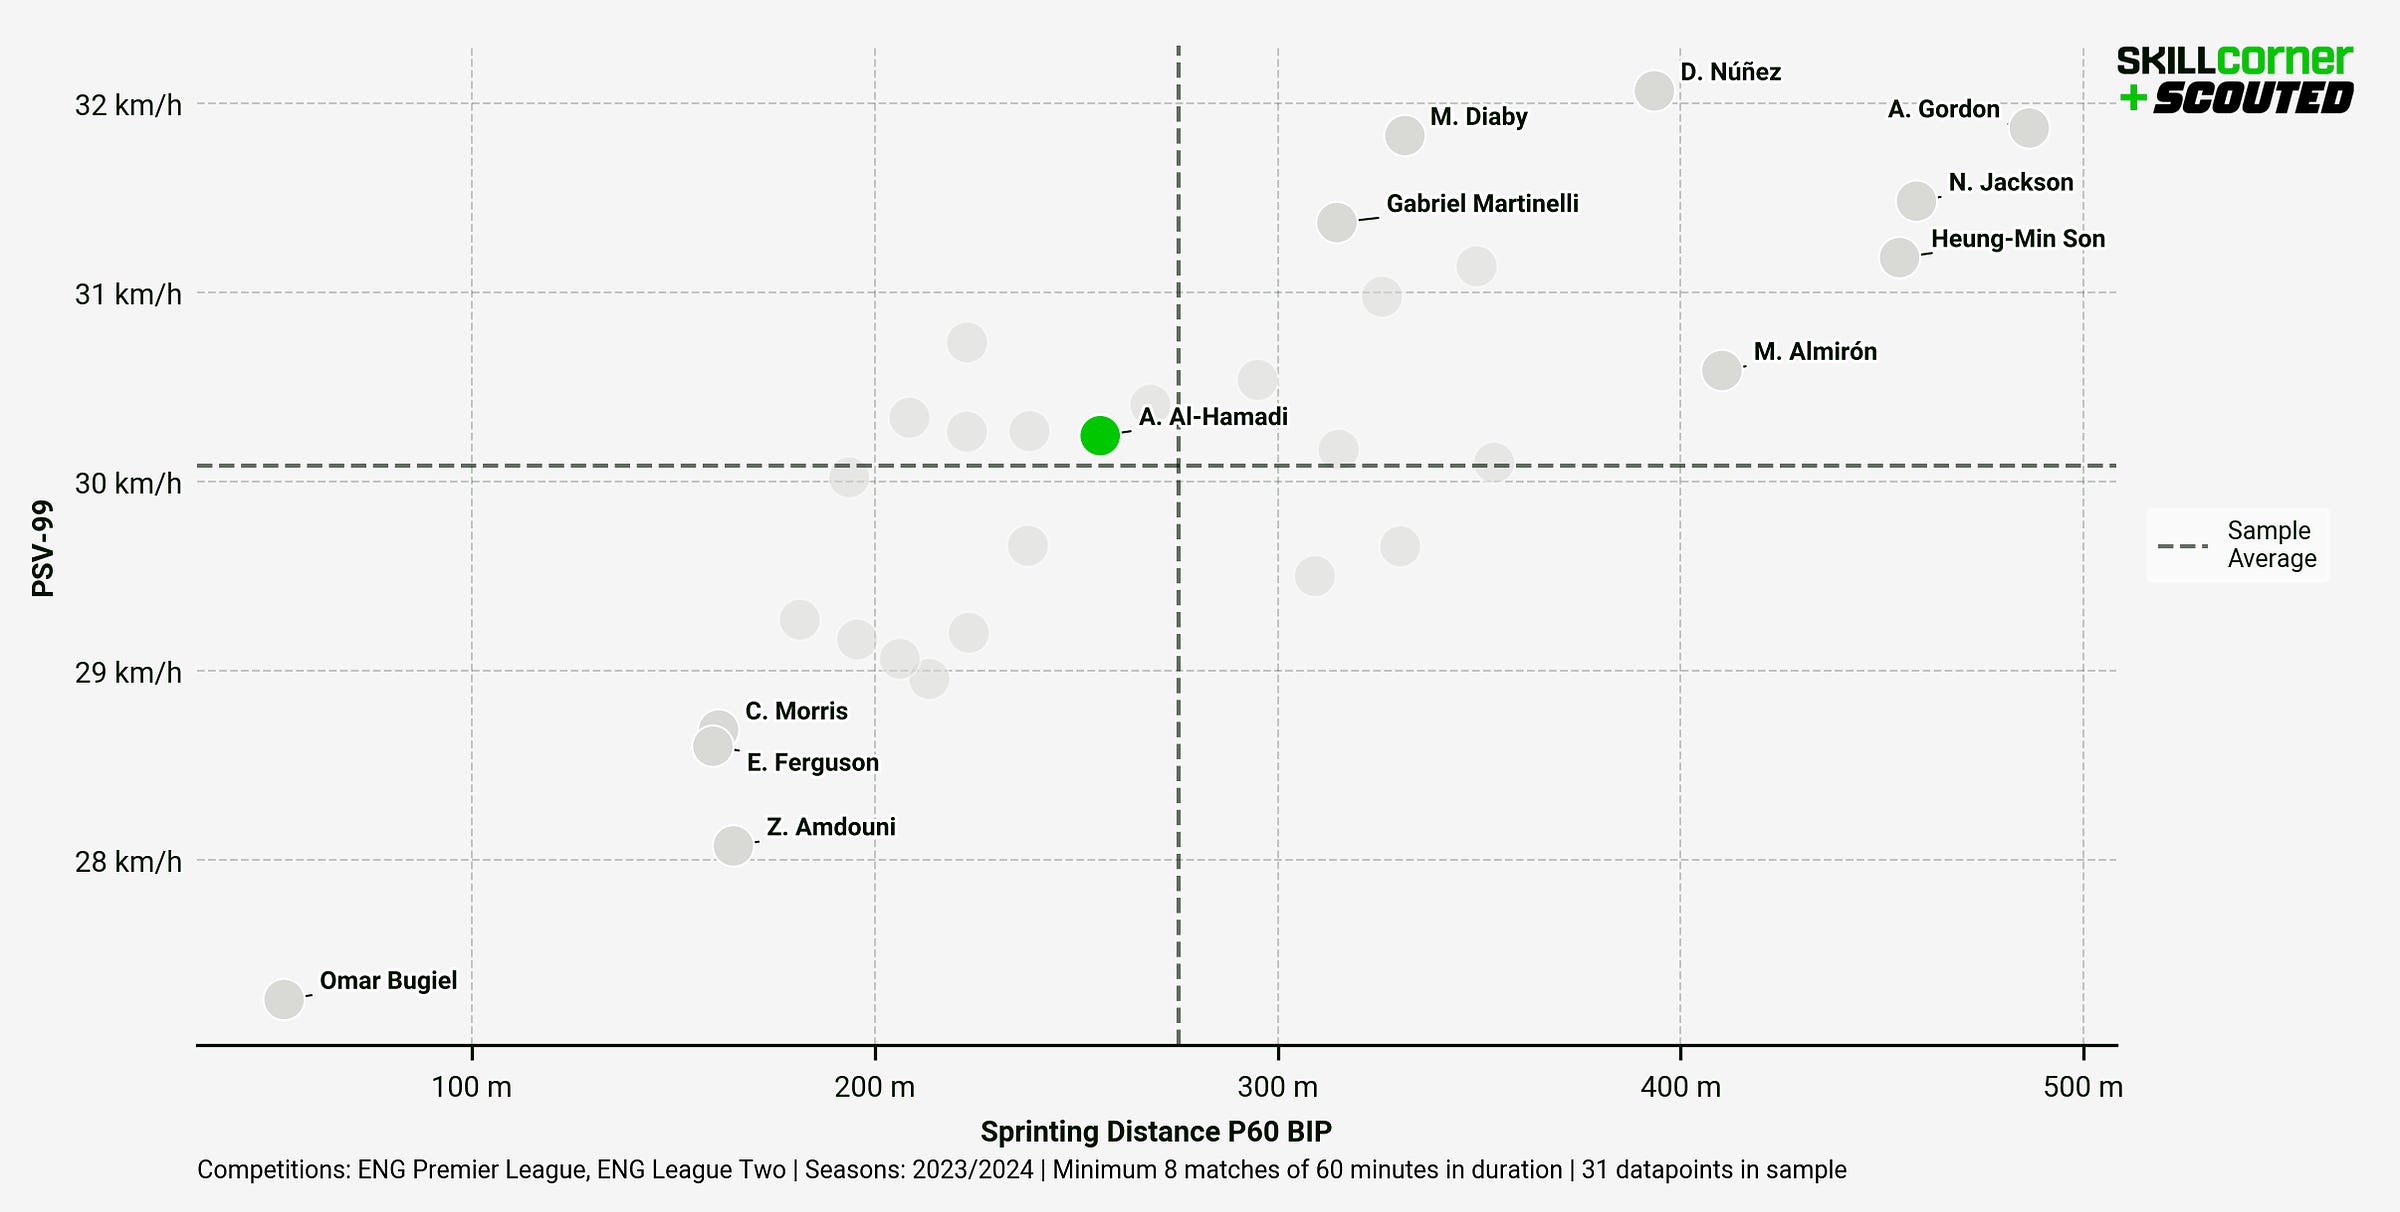 A SCOUTED x SkillCorner graph plotting PSV-99 against Springint Distance P90 among League Two and Premier League forwards in the 2023/24 season.